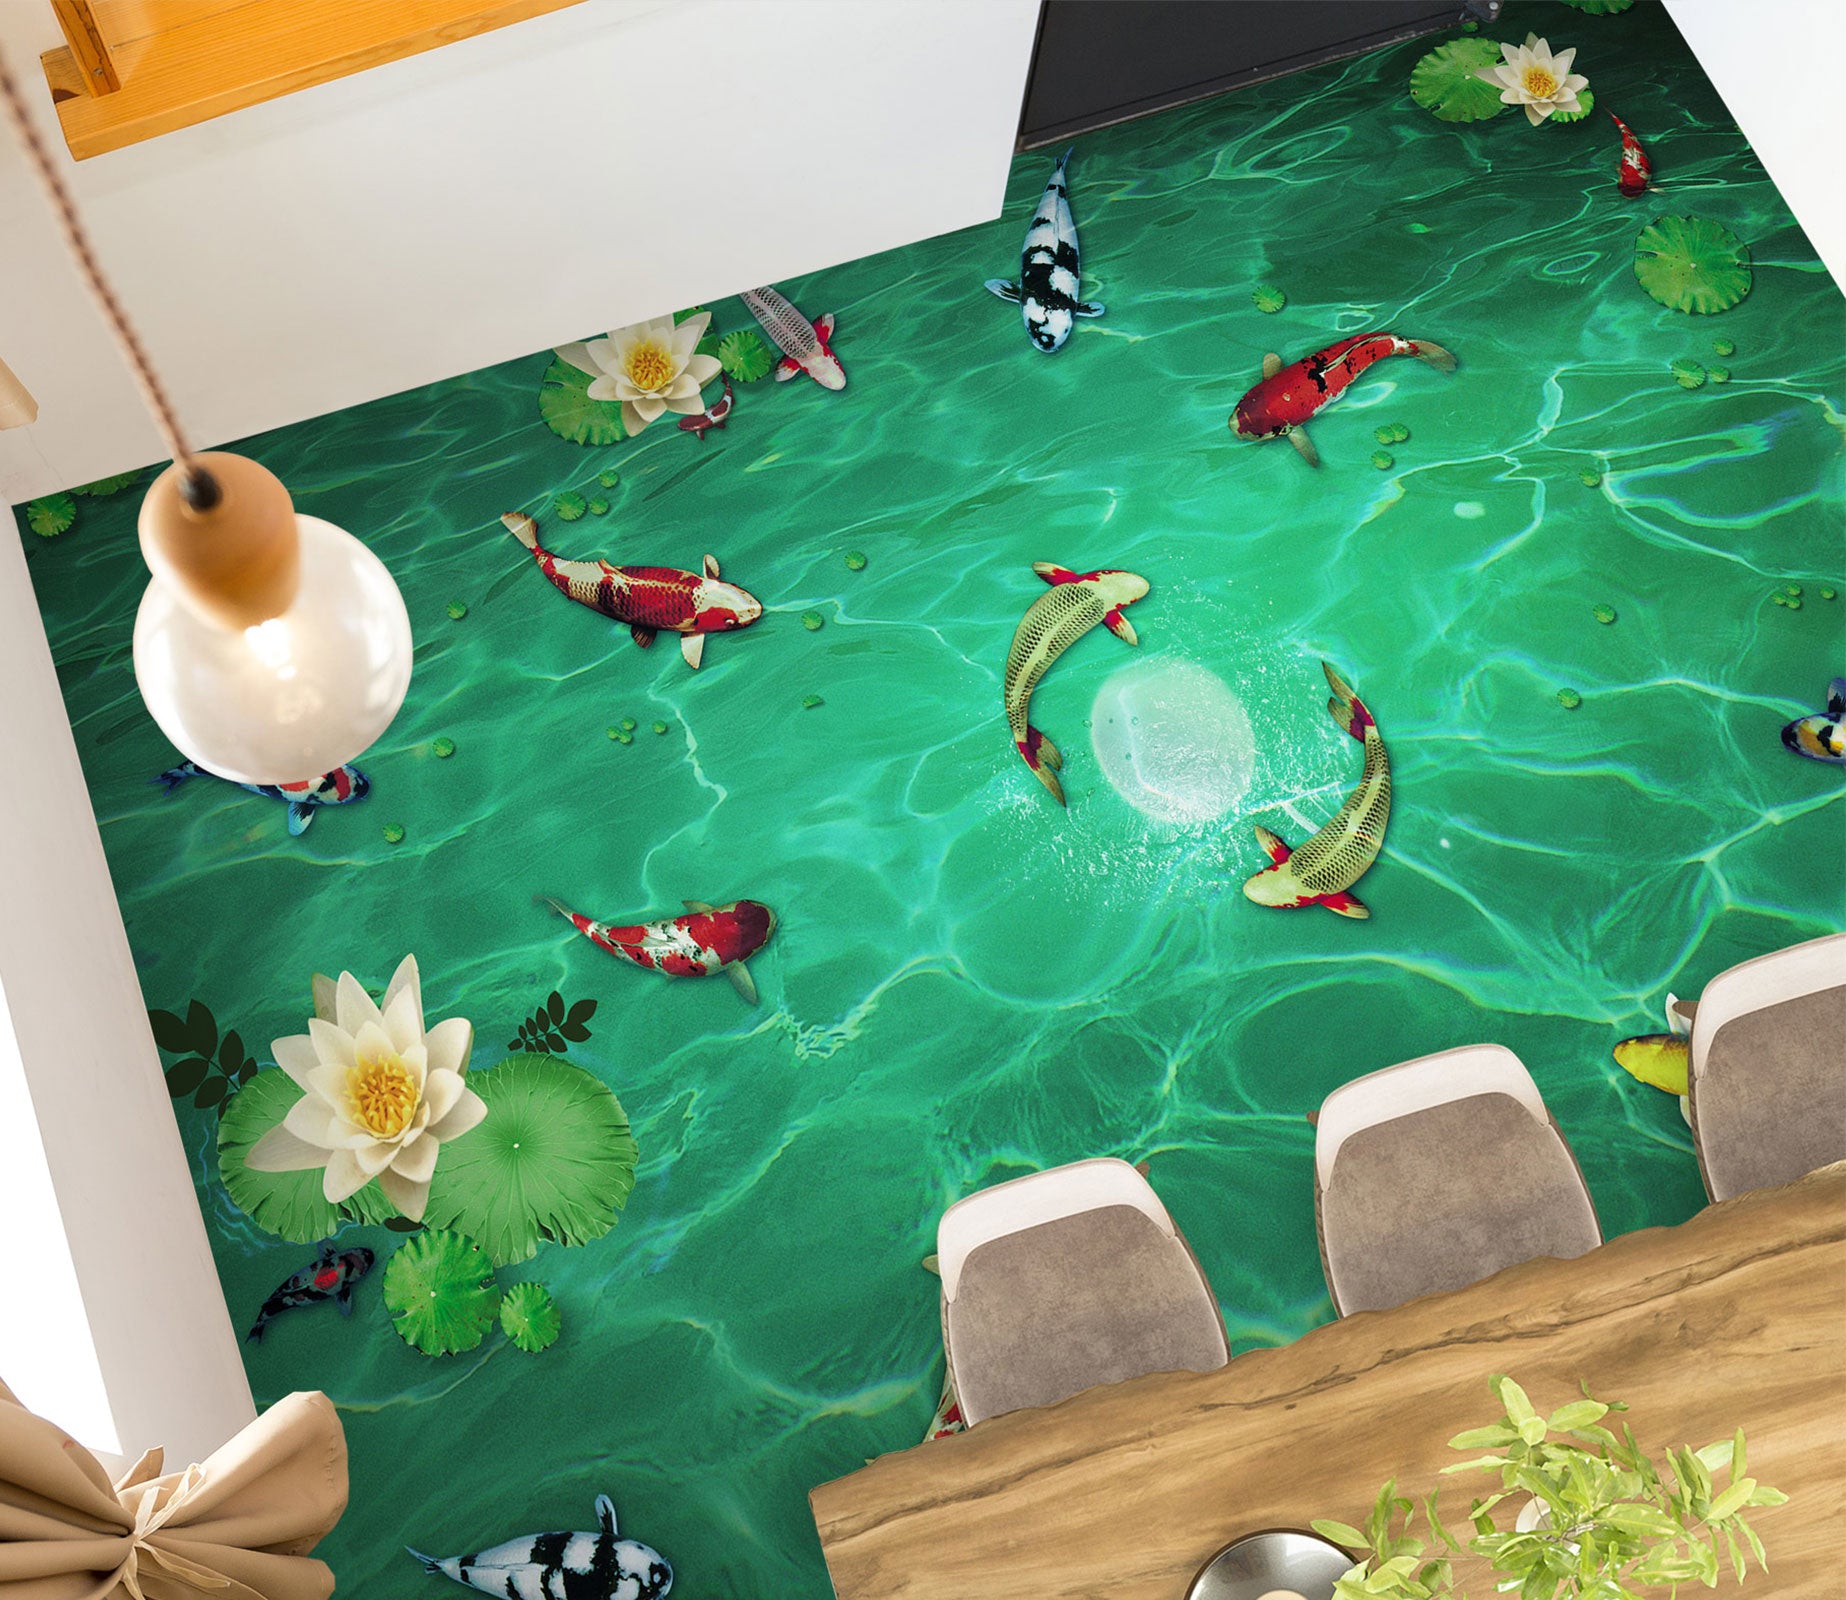 3D Dreamy White Water Lily 1328 Floor Mural  Wallpaper Murals Self-Adhesive Removable Print Epoxy